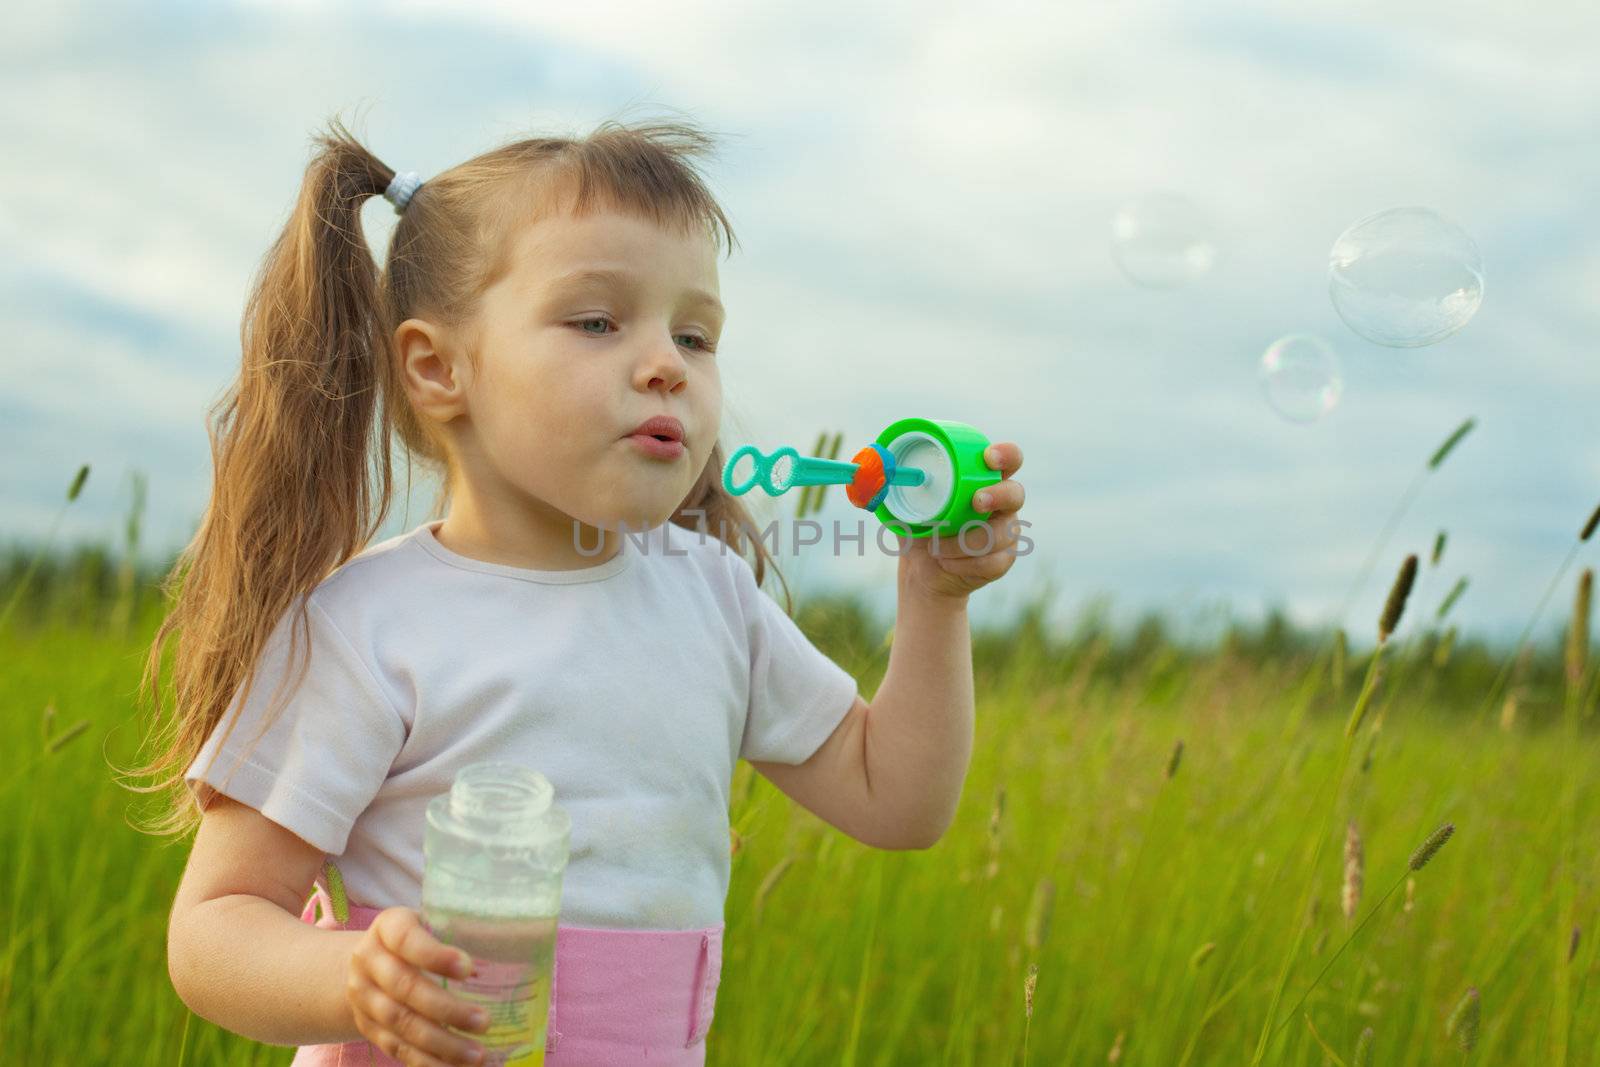 The little girl starts soap bubbles in the field